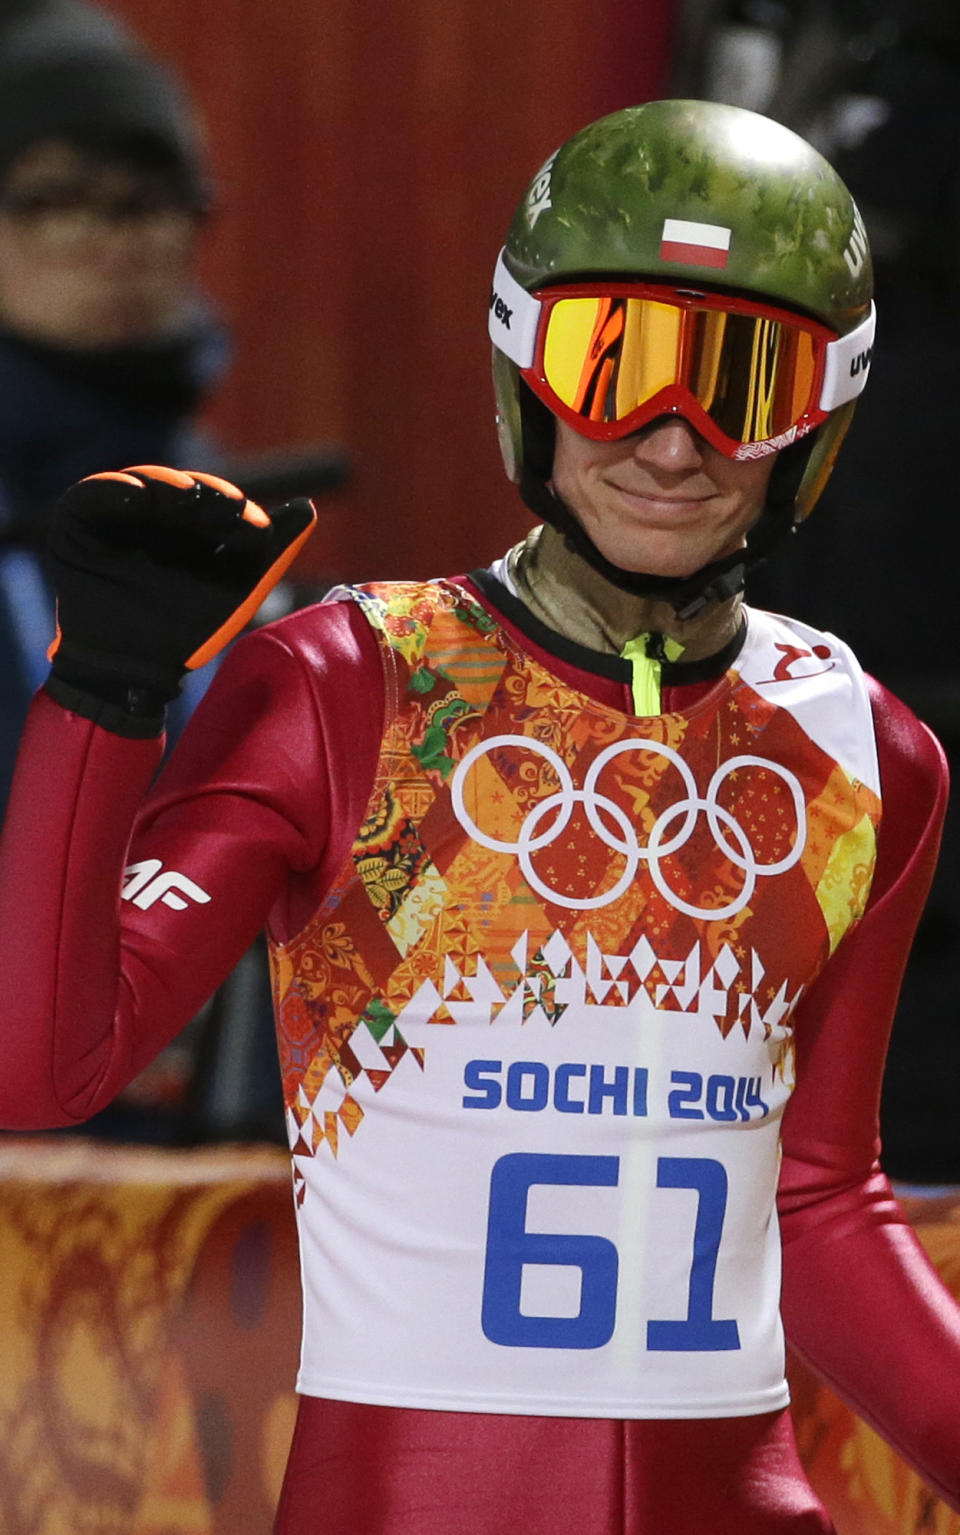 Poland's Kamil Stoch smiles after an attempt during the men's normal hill ski jumping qualification at the 2014 Winter Olympics, Saturday, Feb. 8, 2014, in Krasnaya Polyana, Russia. (AP Photo/Gregorio Borgia)